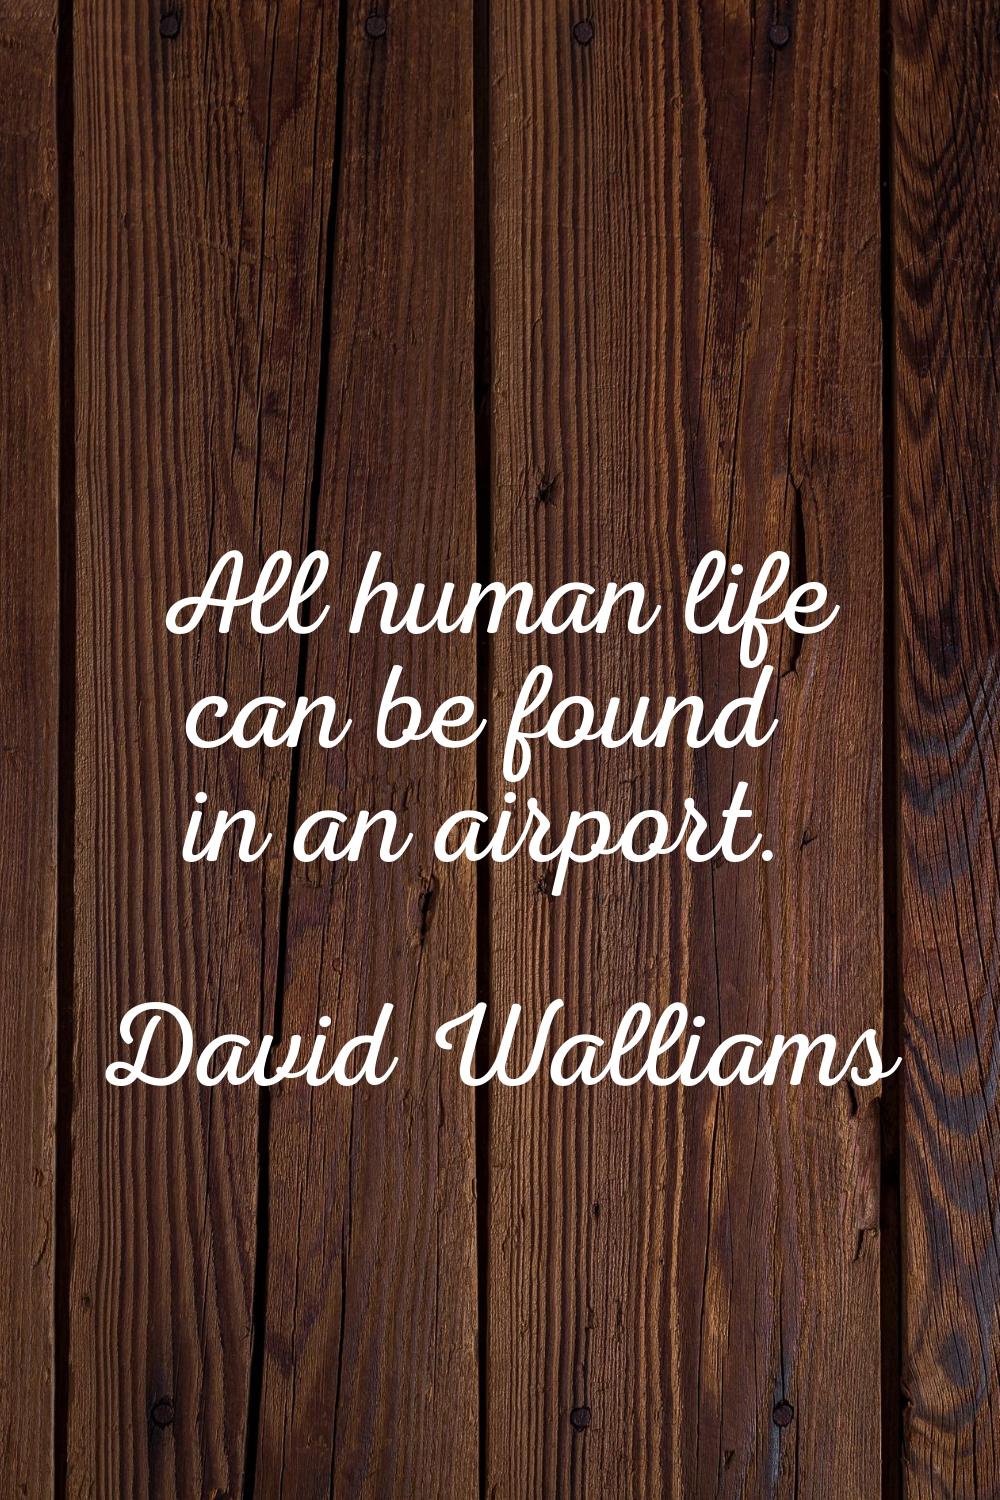 All human life can be found in an airport.